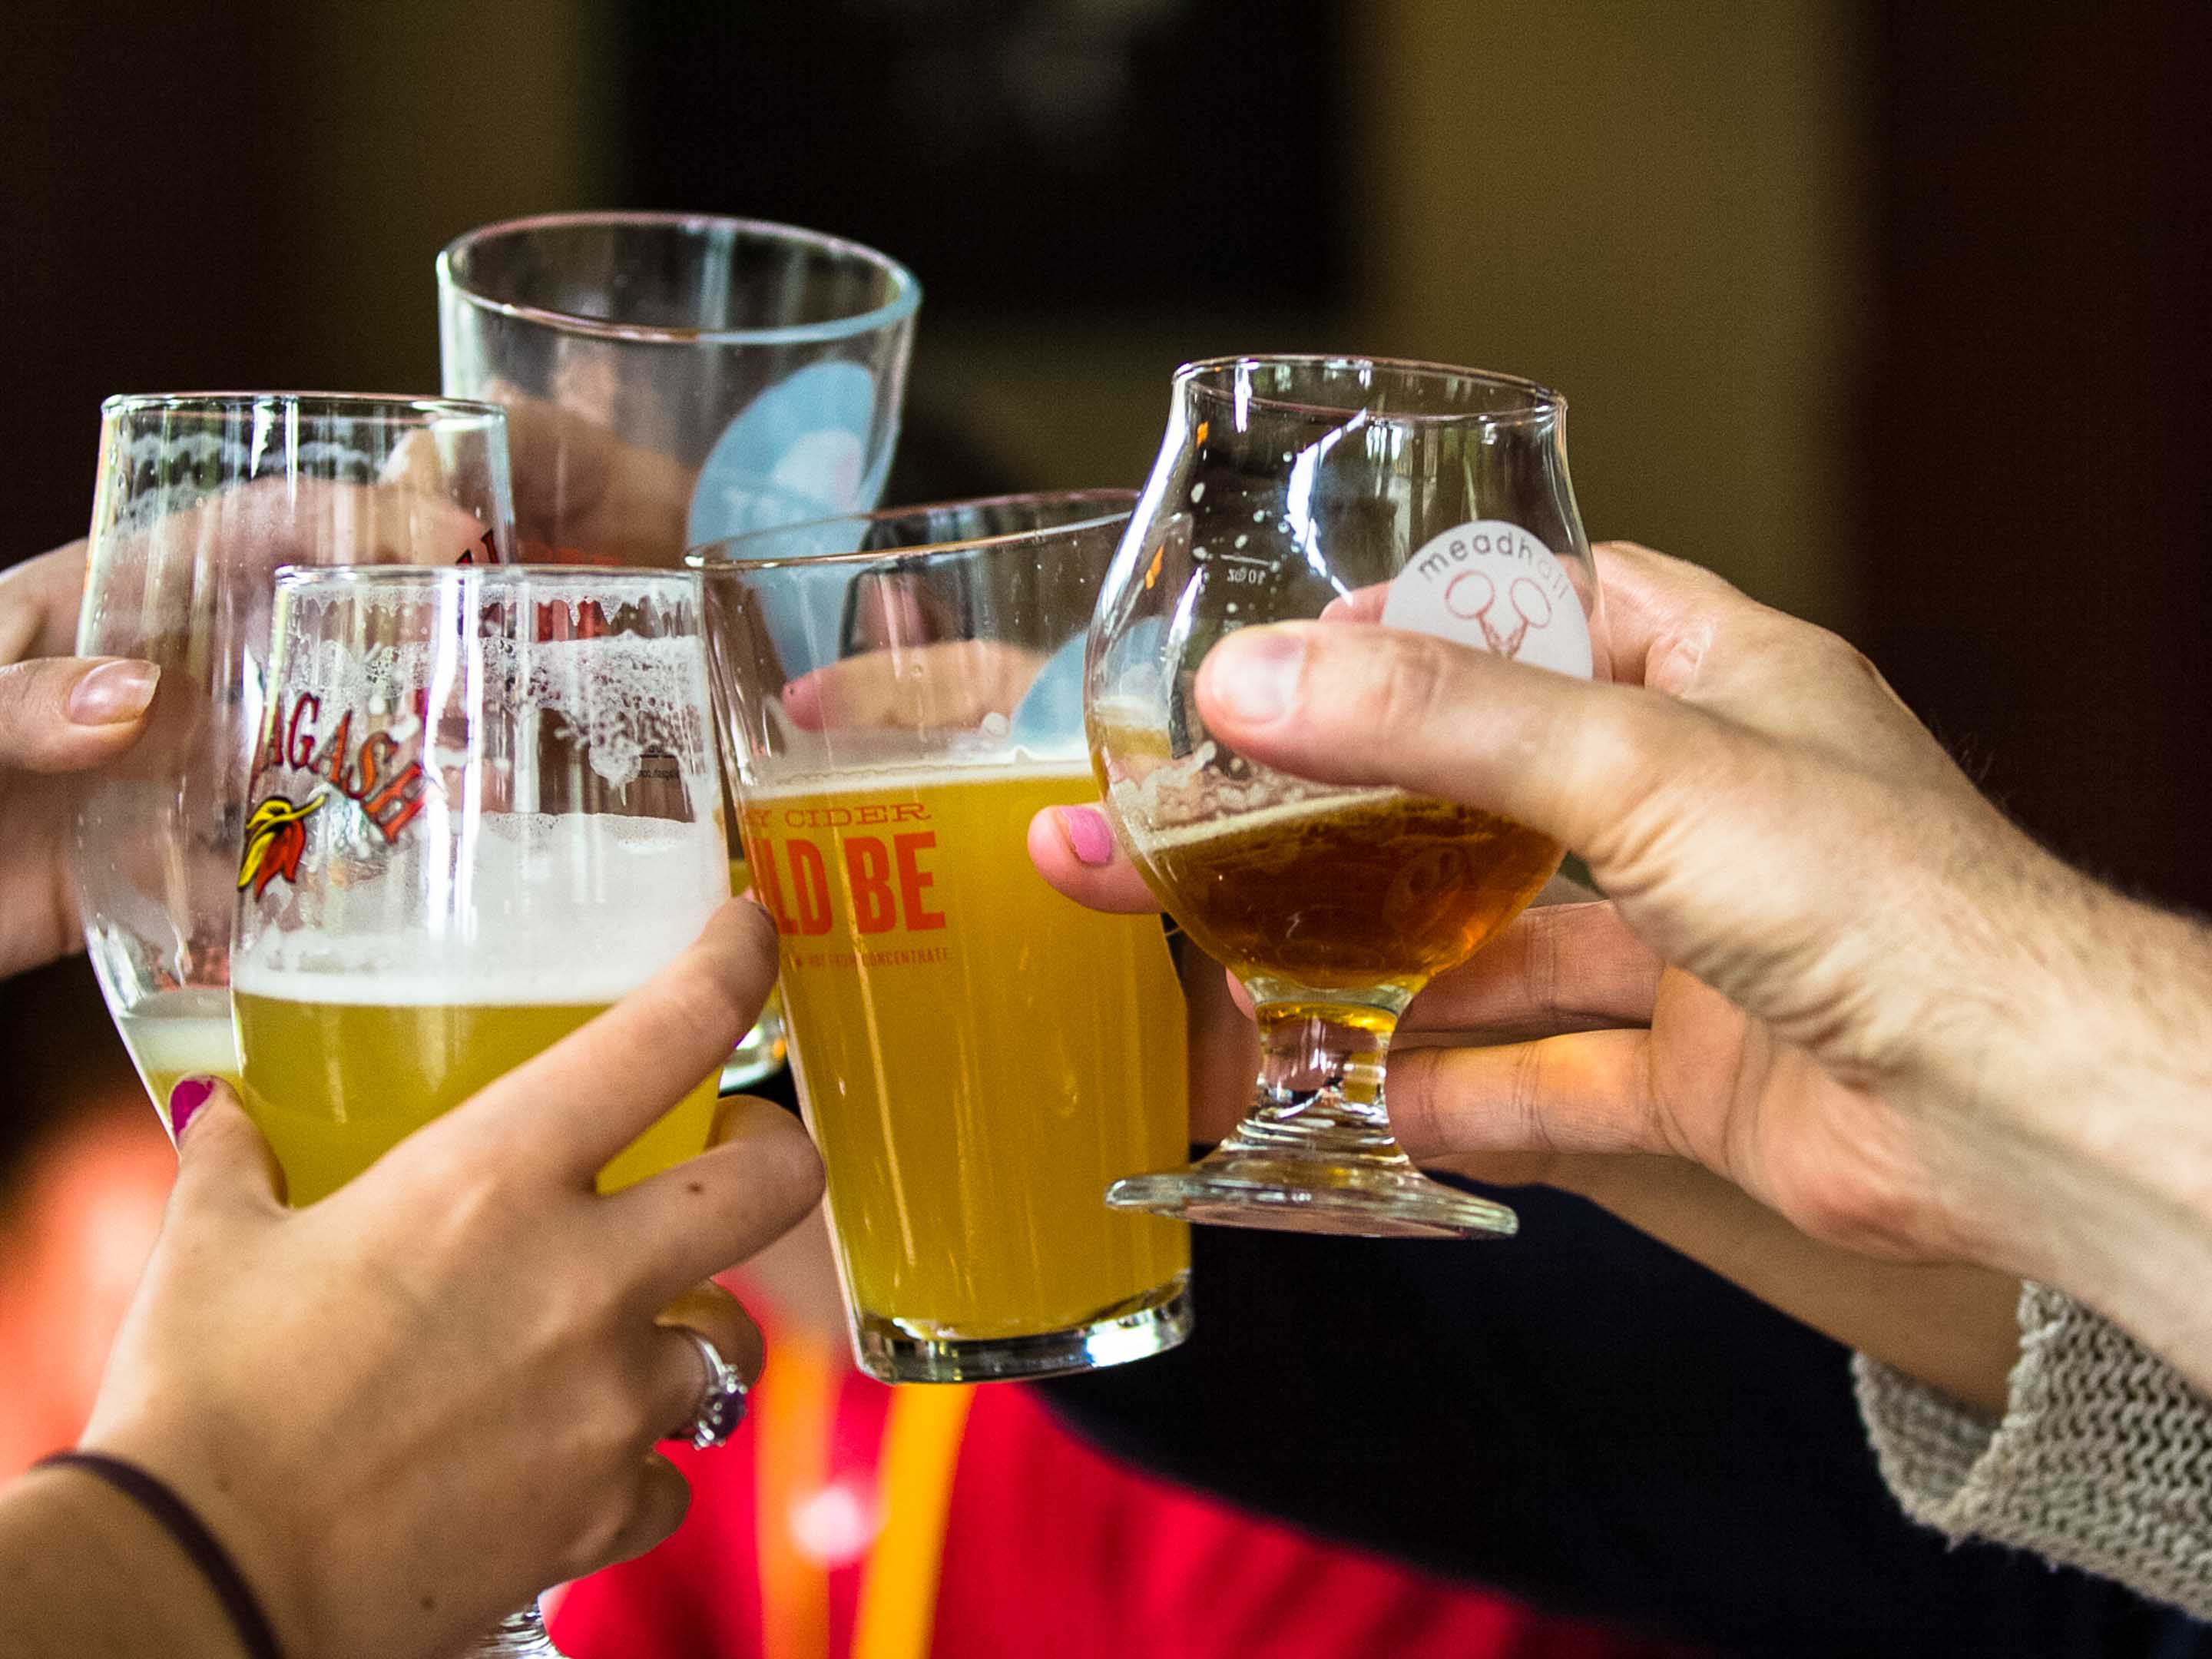 City Brew Tours guests toasting with beer glasses